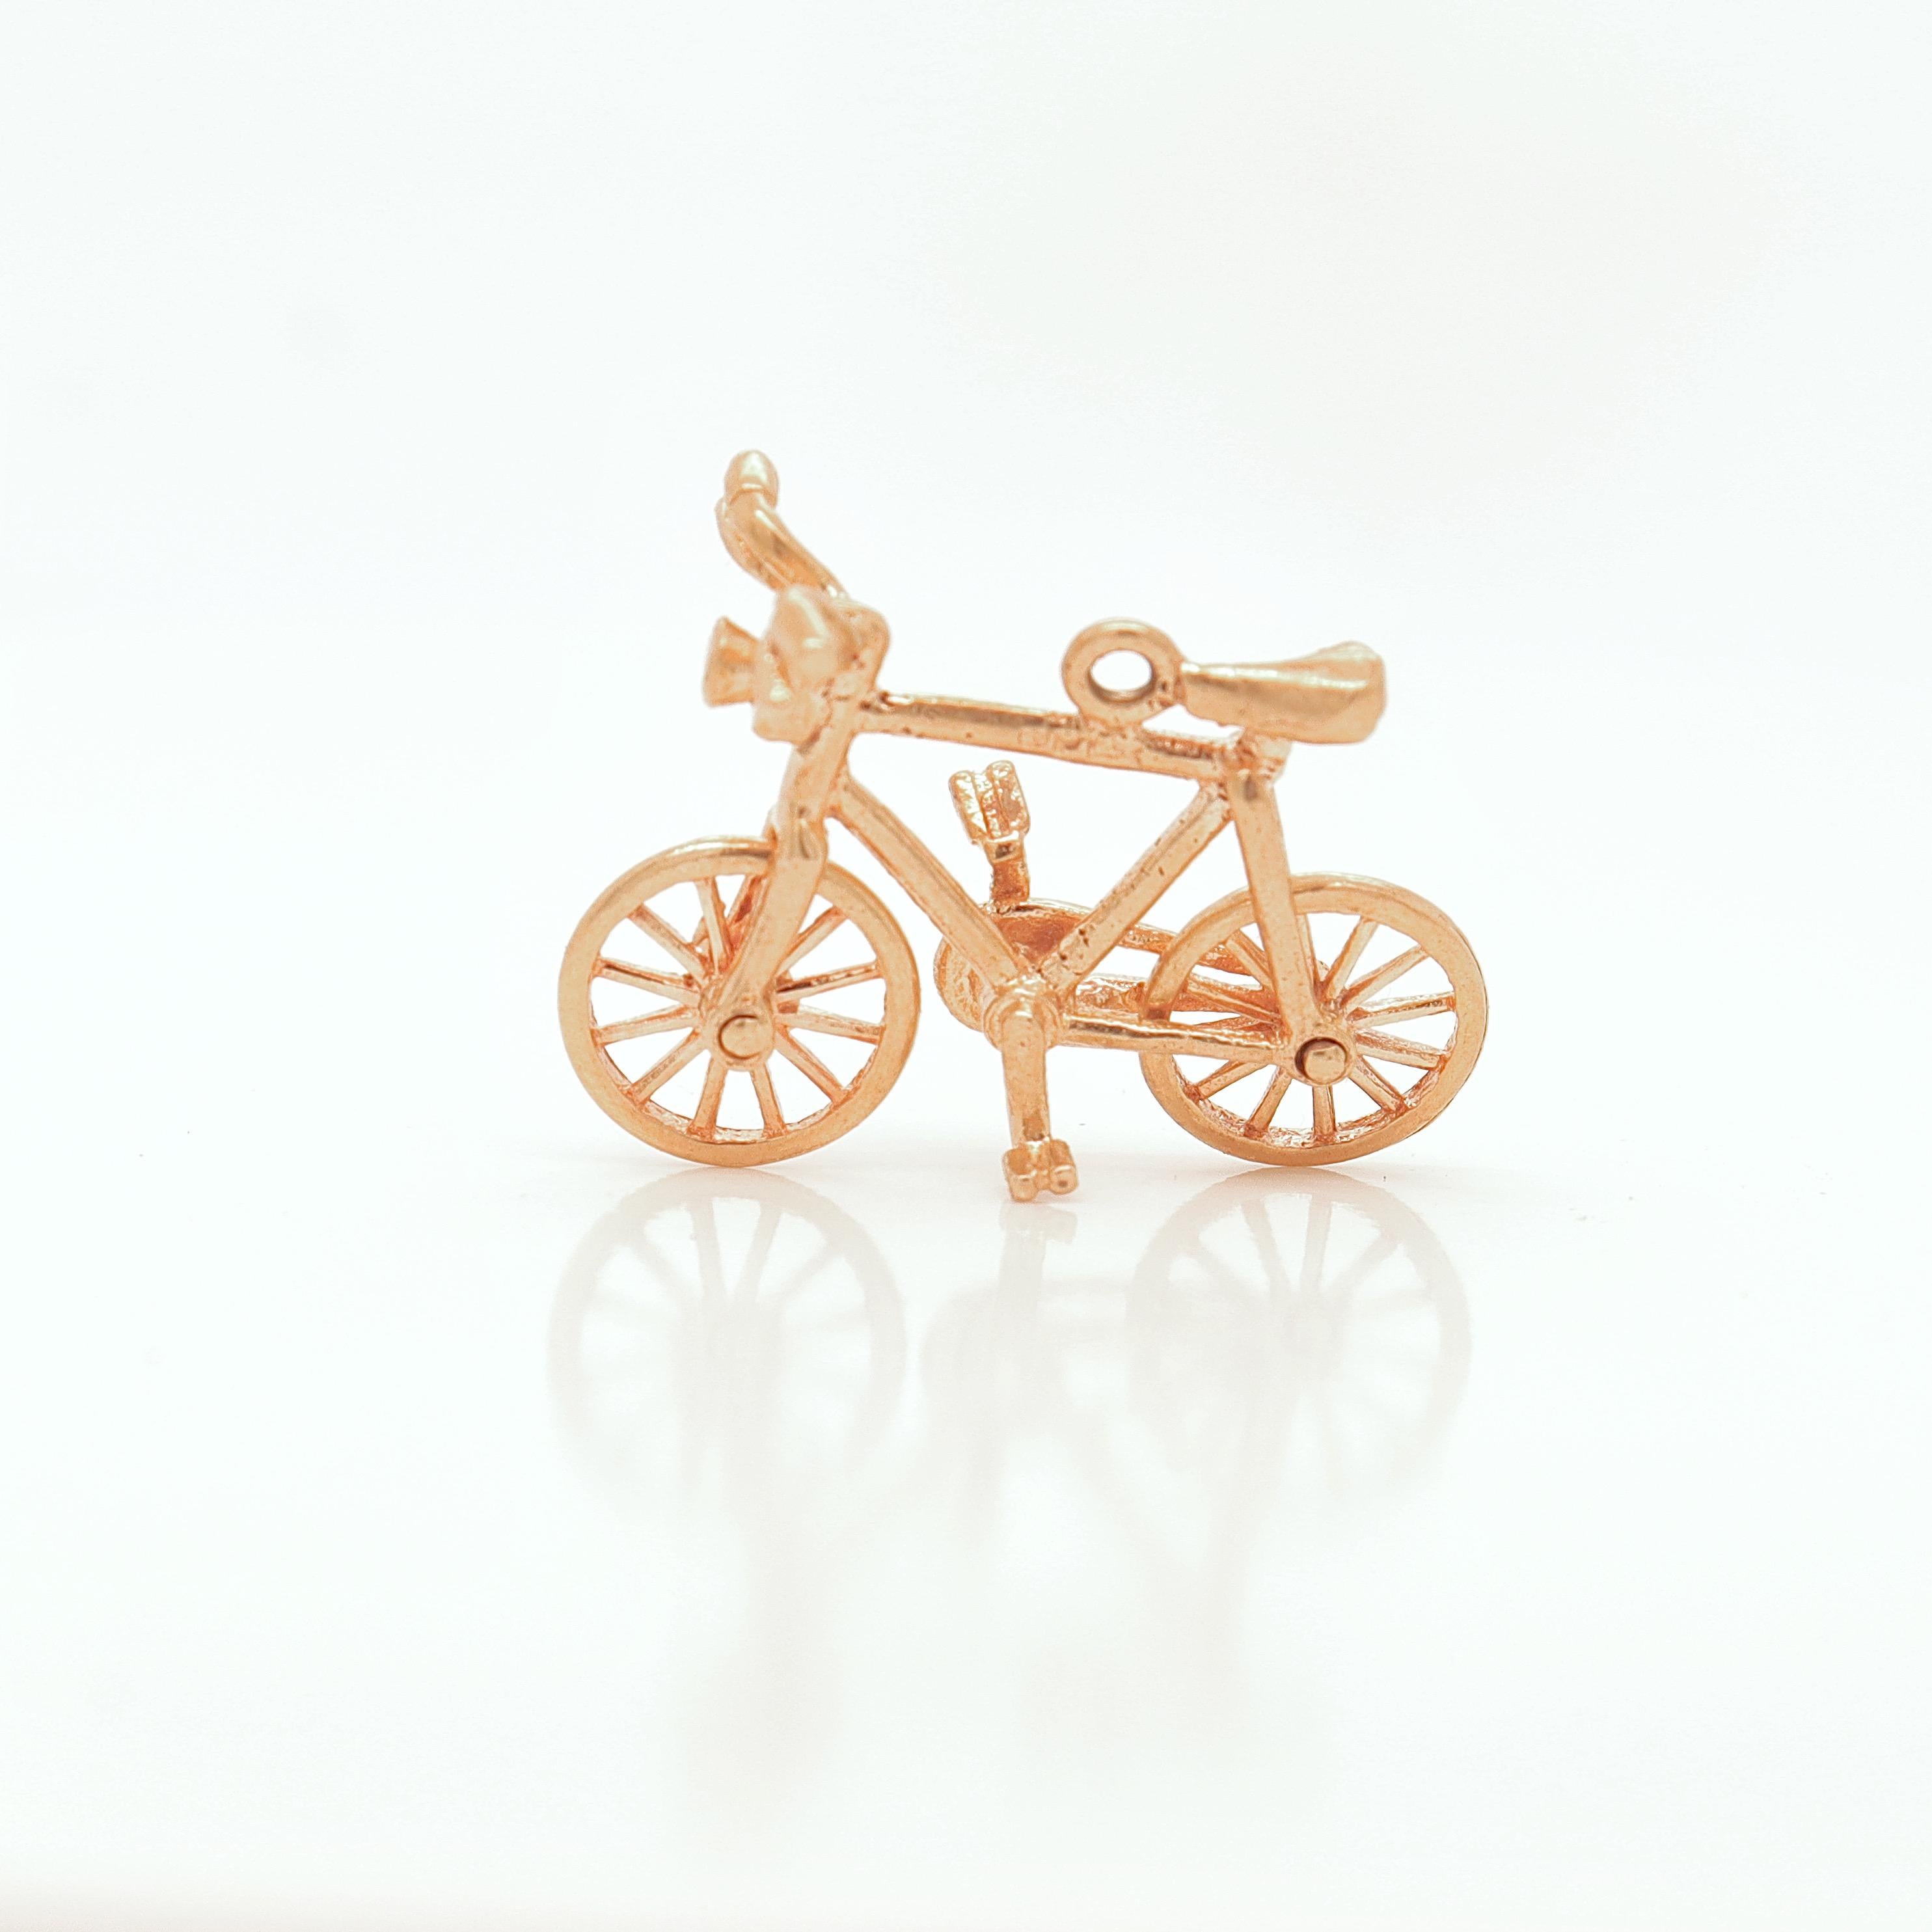 A fine vintage charm for a bracelet.

In 14 karat gold.

In the form of a bicycle.

Simply a great charm!

Date:
20th Century

Overall Condition:
It is in overall good, as-pictured, used estate condition with some fine & light surface scratches and